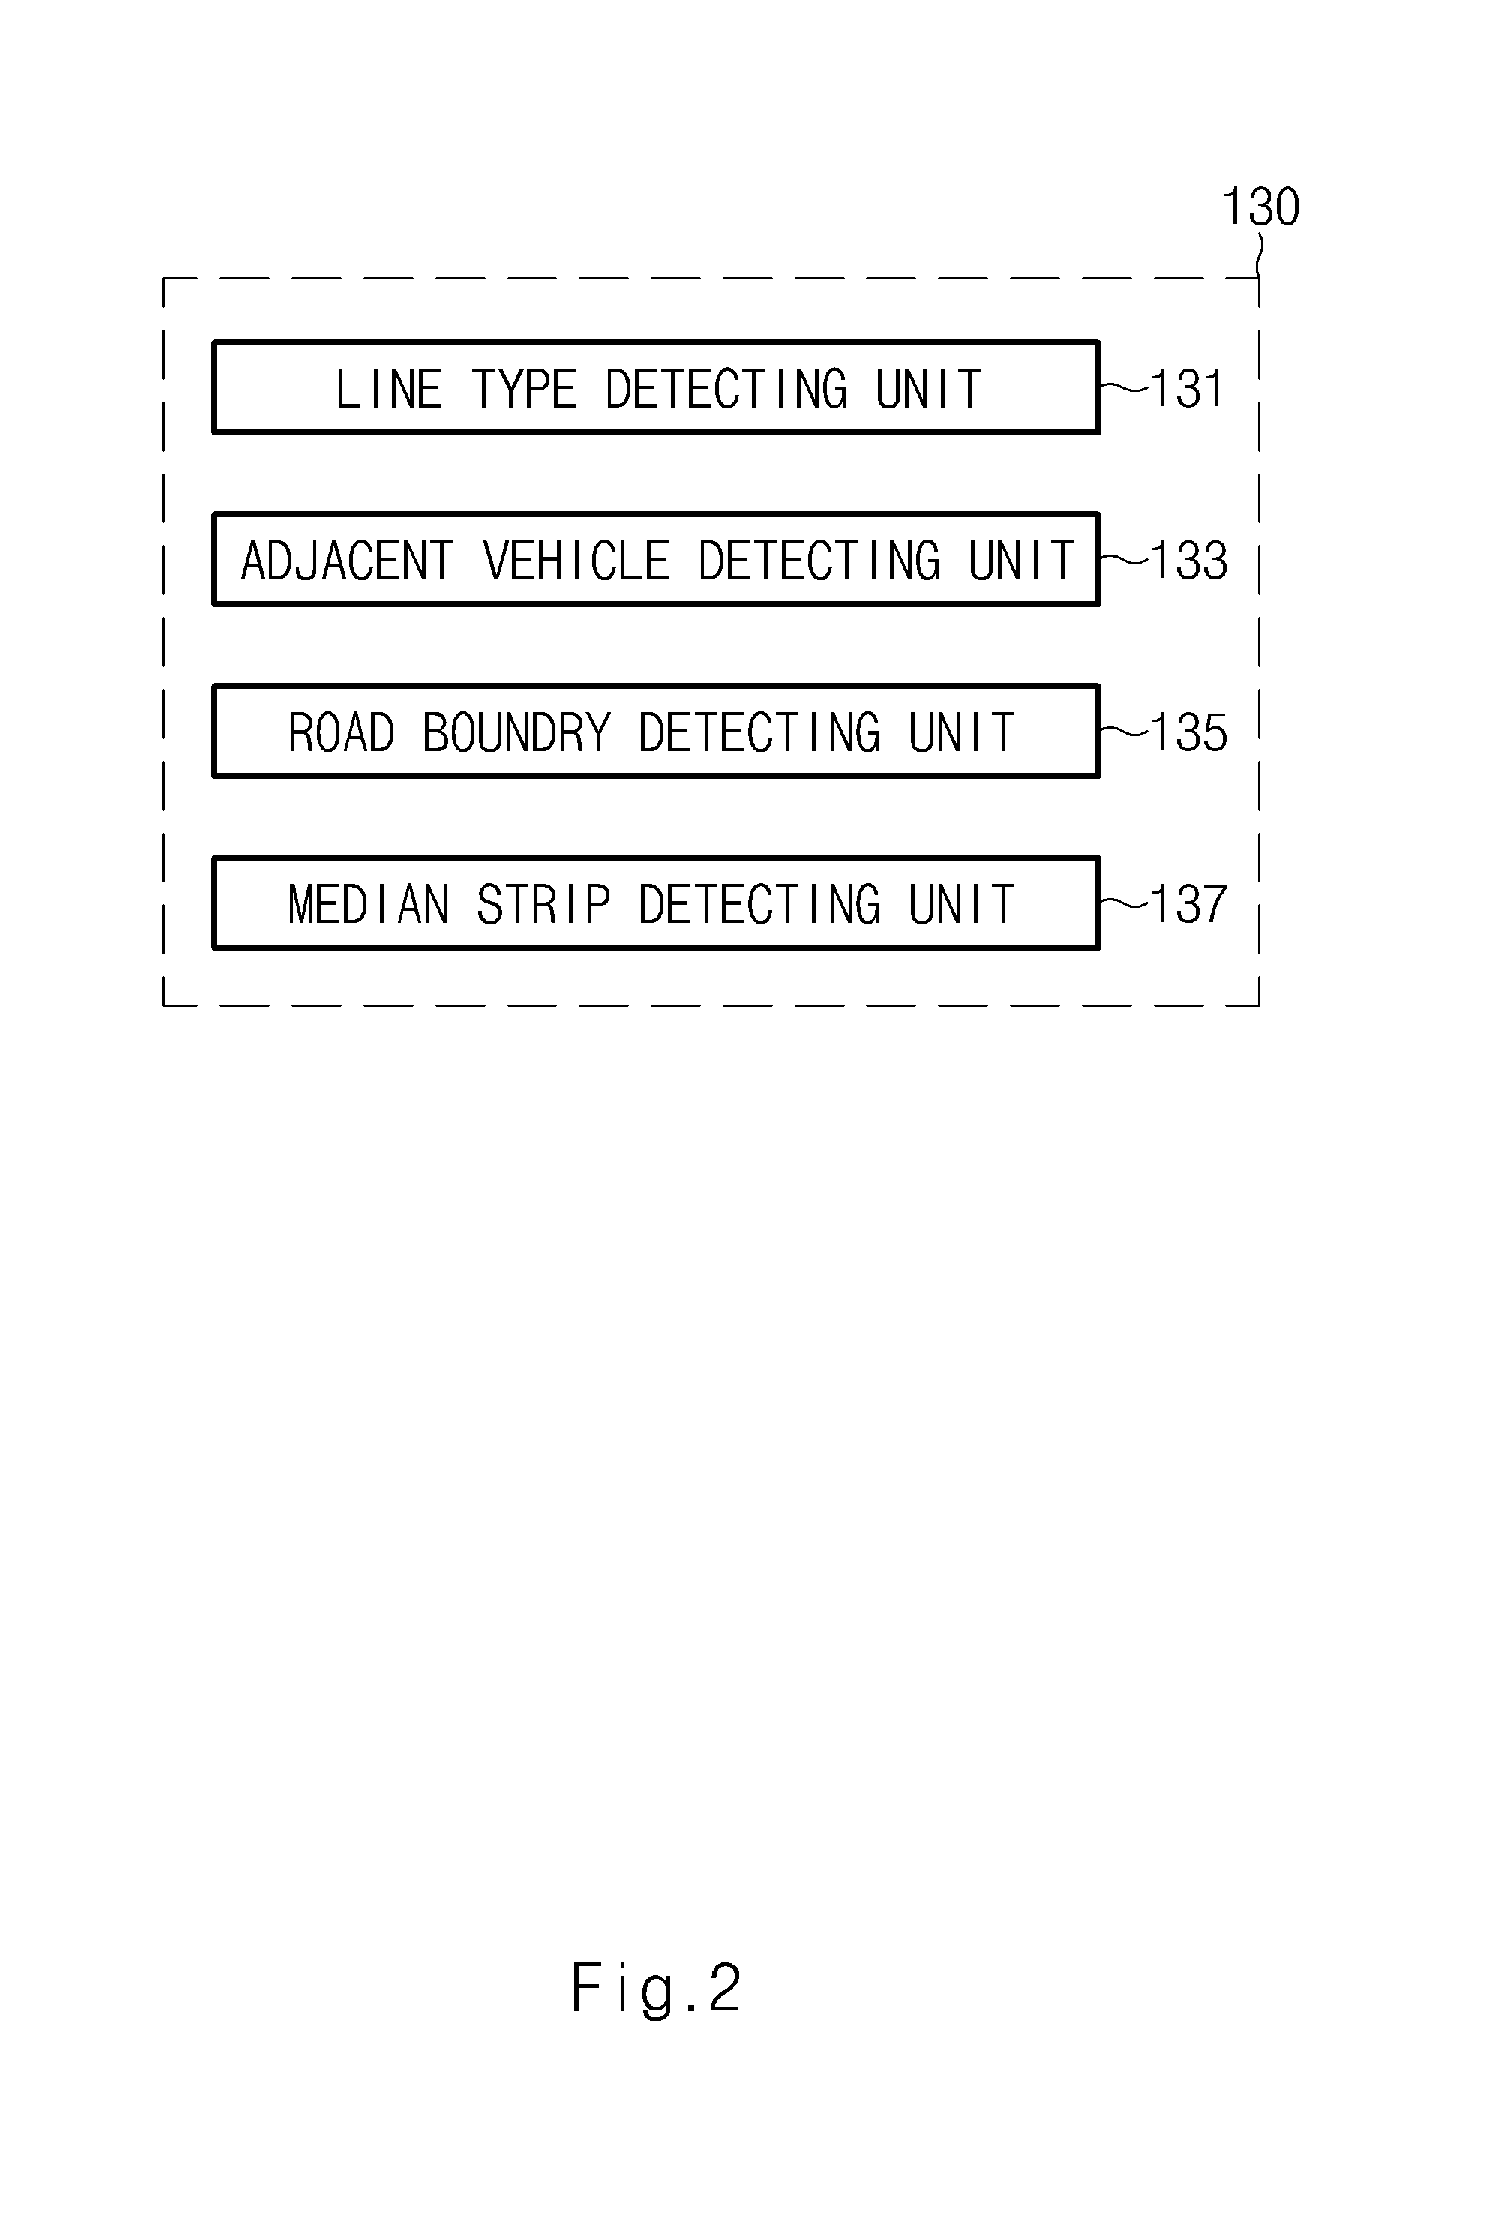 Apparatus and method for recognizing driving lane